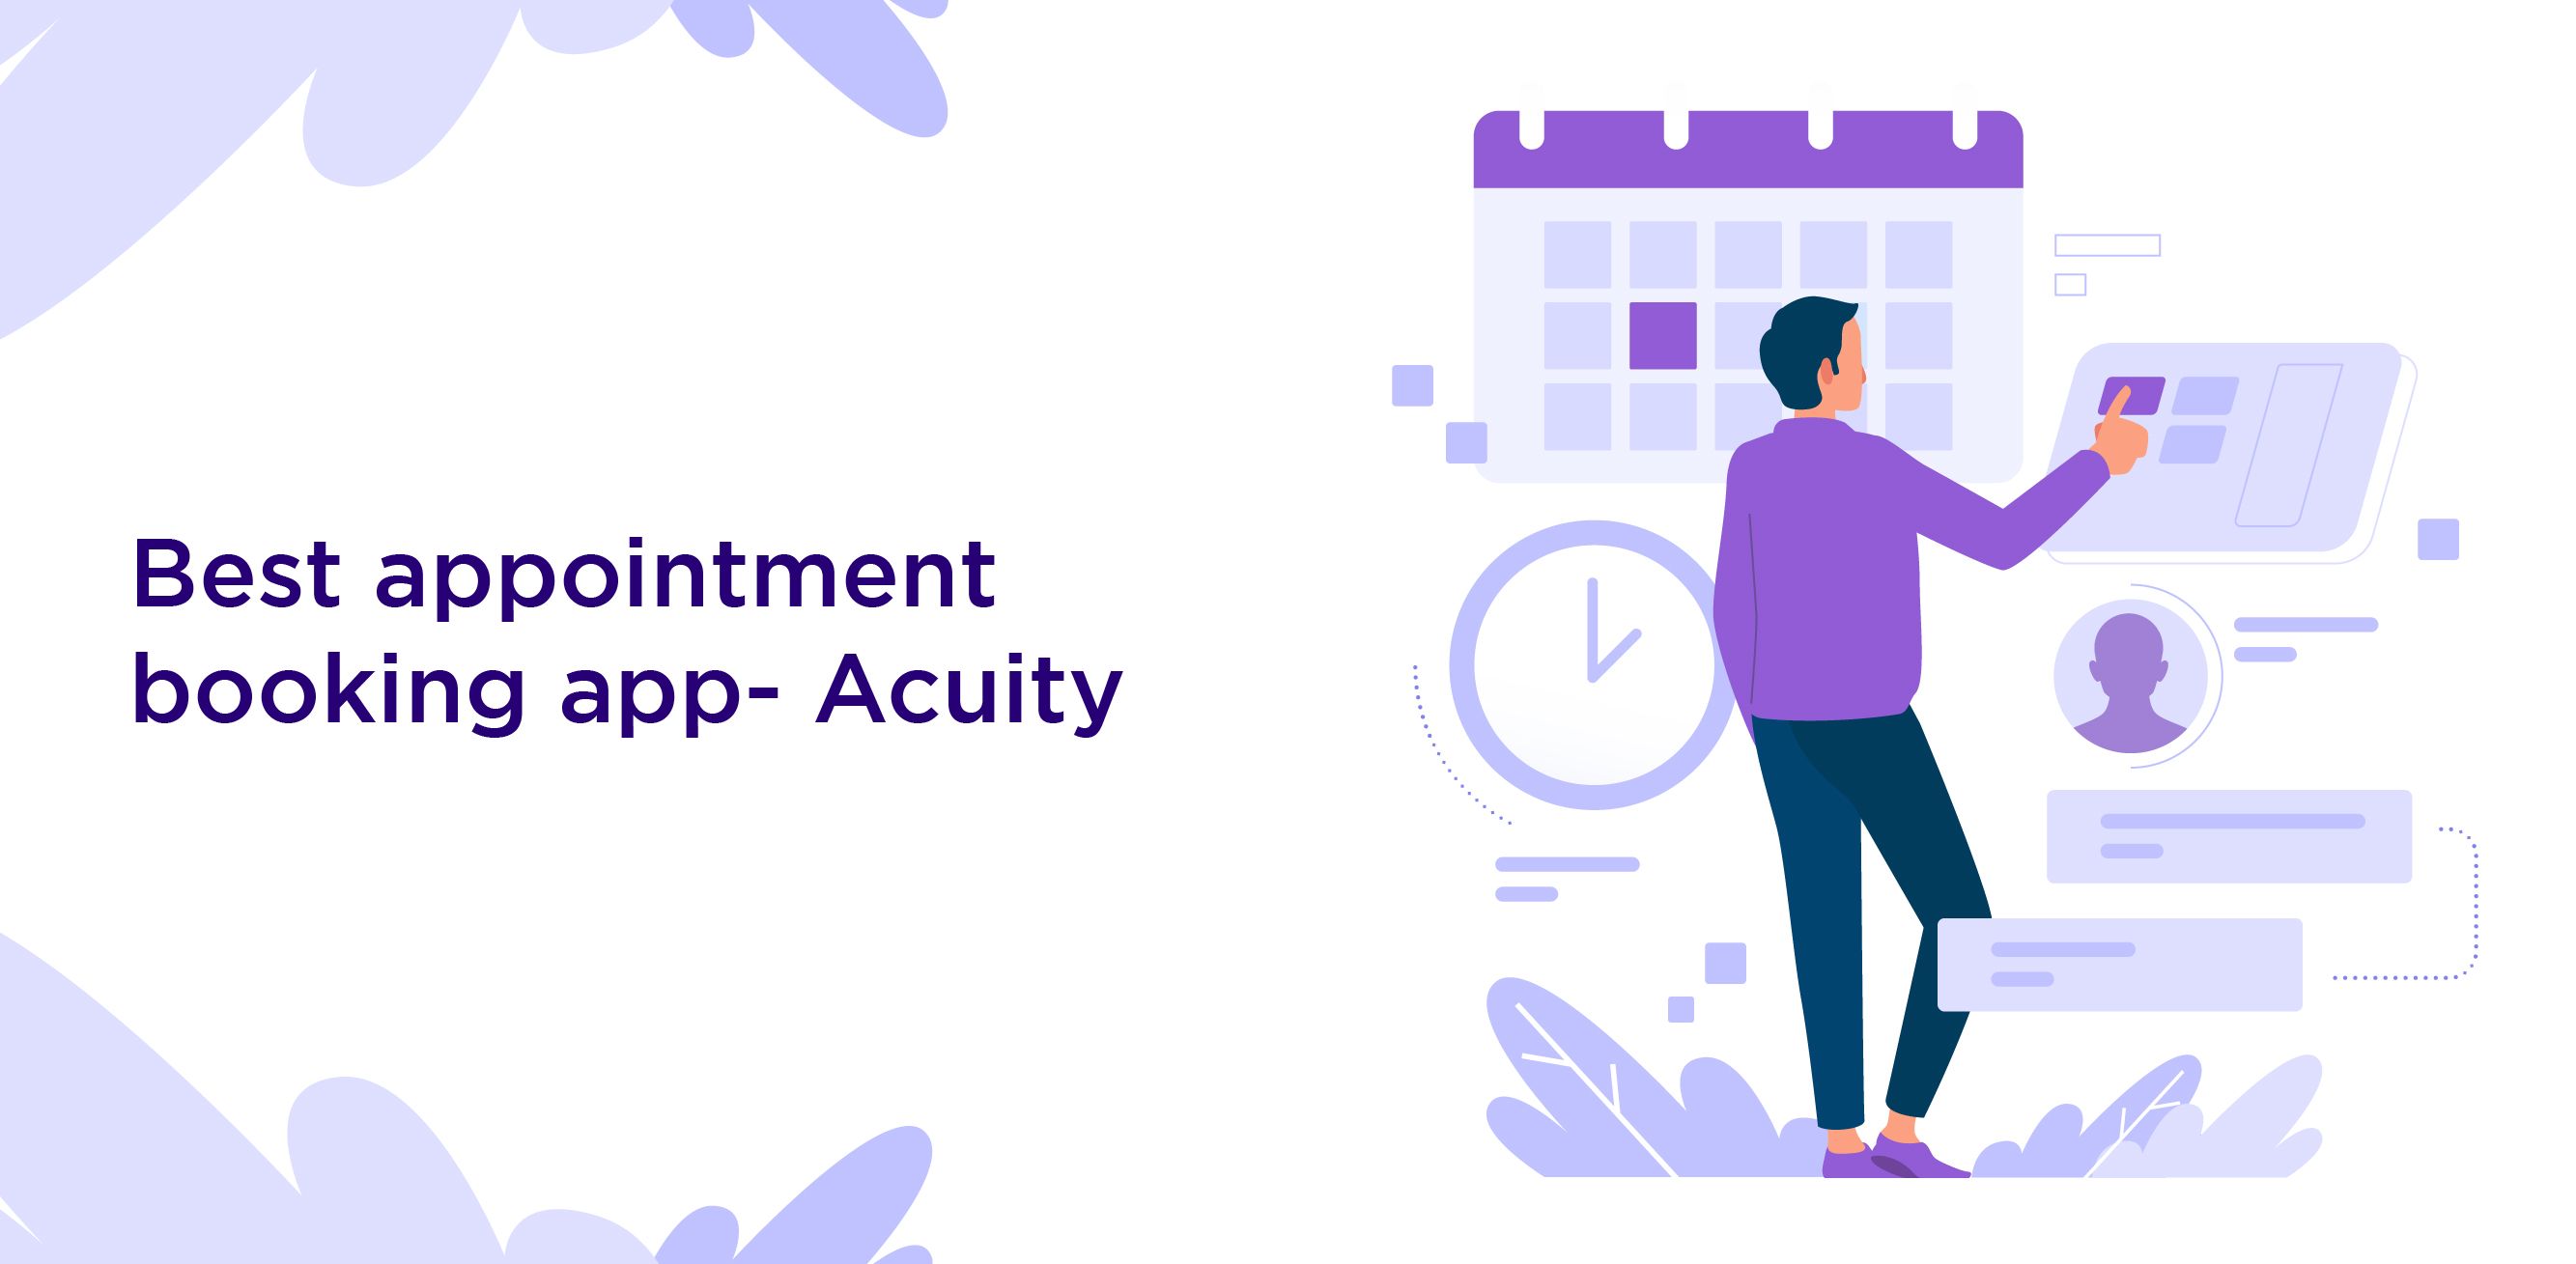 Best appointment booking app- Acuity